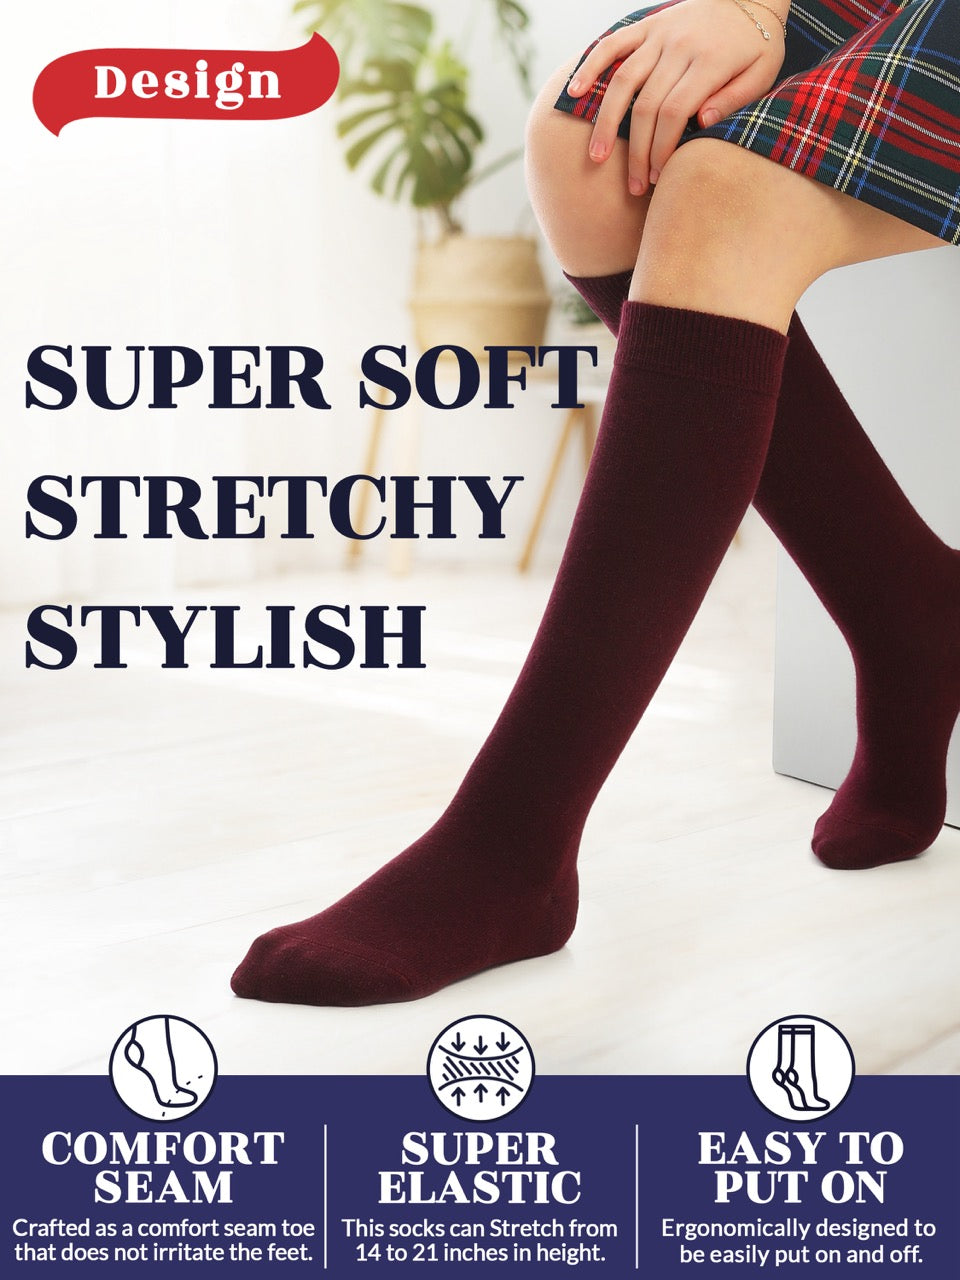 Experience the ultimate comfort and style with Hugh Ugoli Kids Bamboo School Socks. These burgundy socks perfect for school or everyday wear, our high-quality knee-high socks meet uniform standards while reducing blisters and staying in place. Available in four sizes for children aged 3-14 years